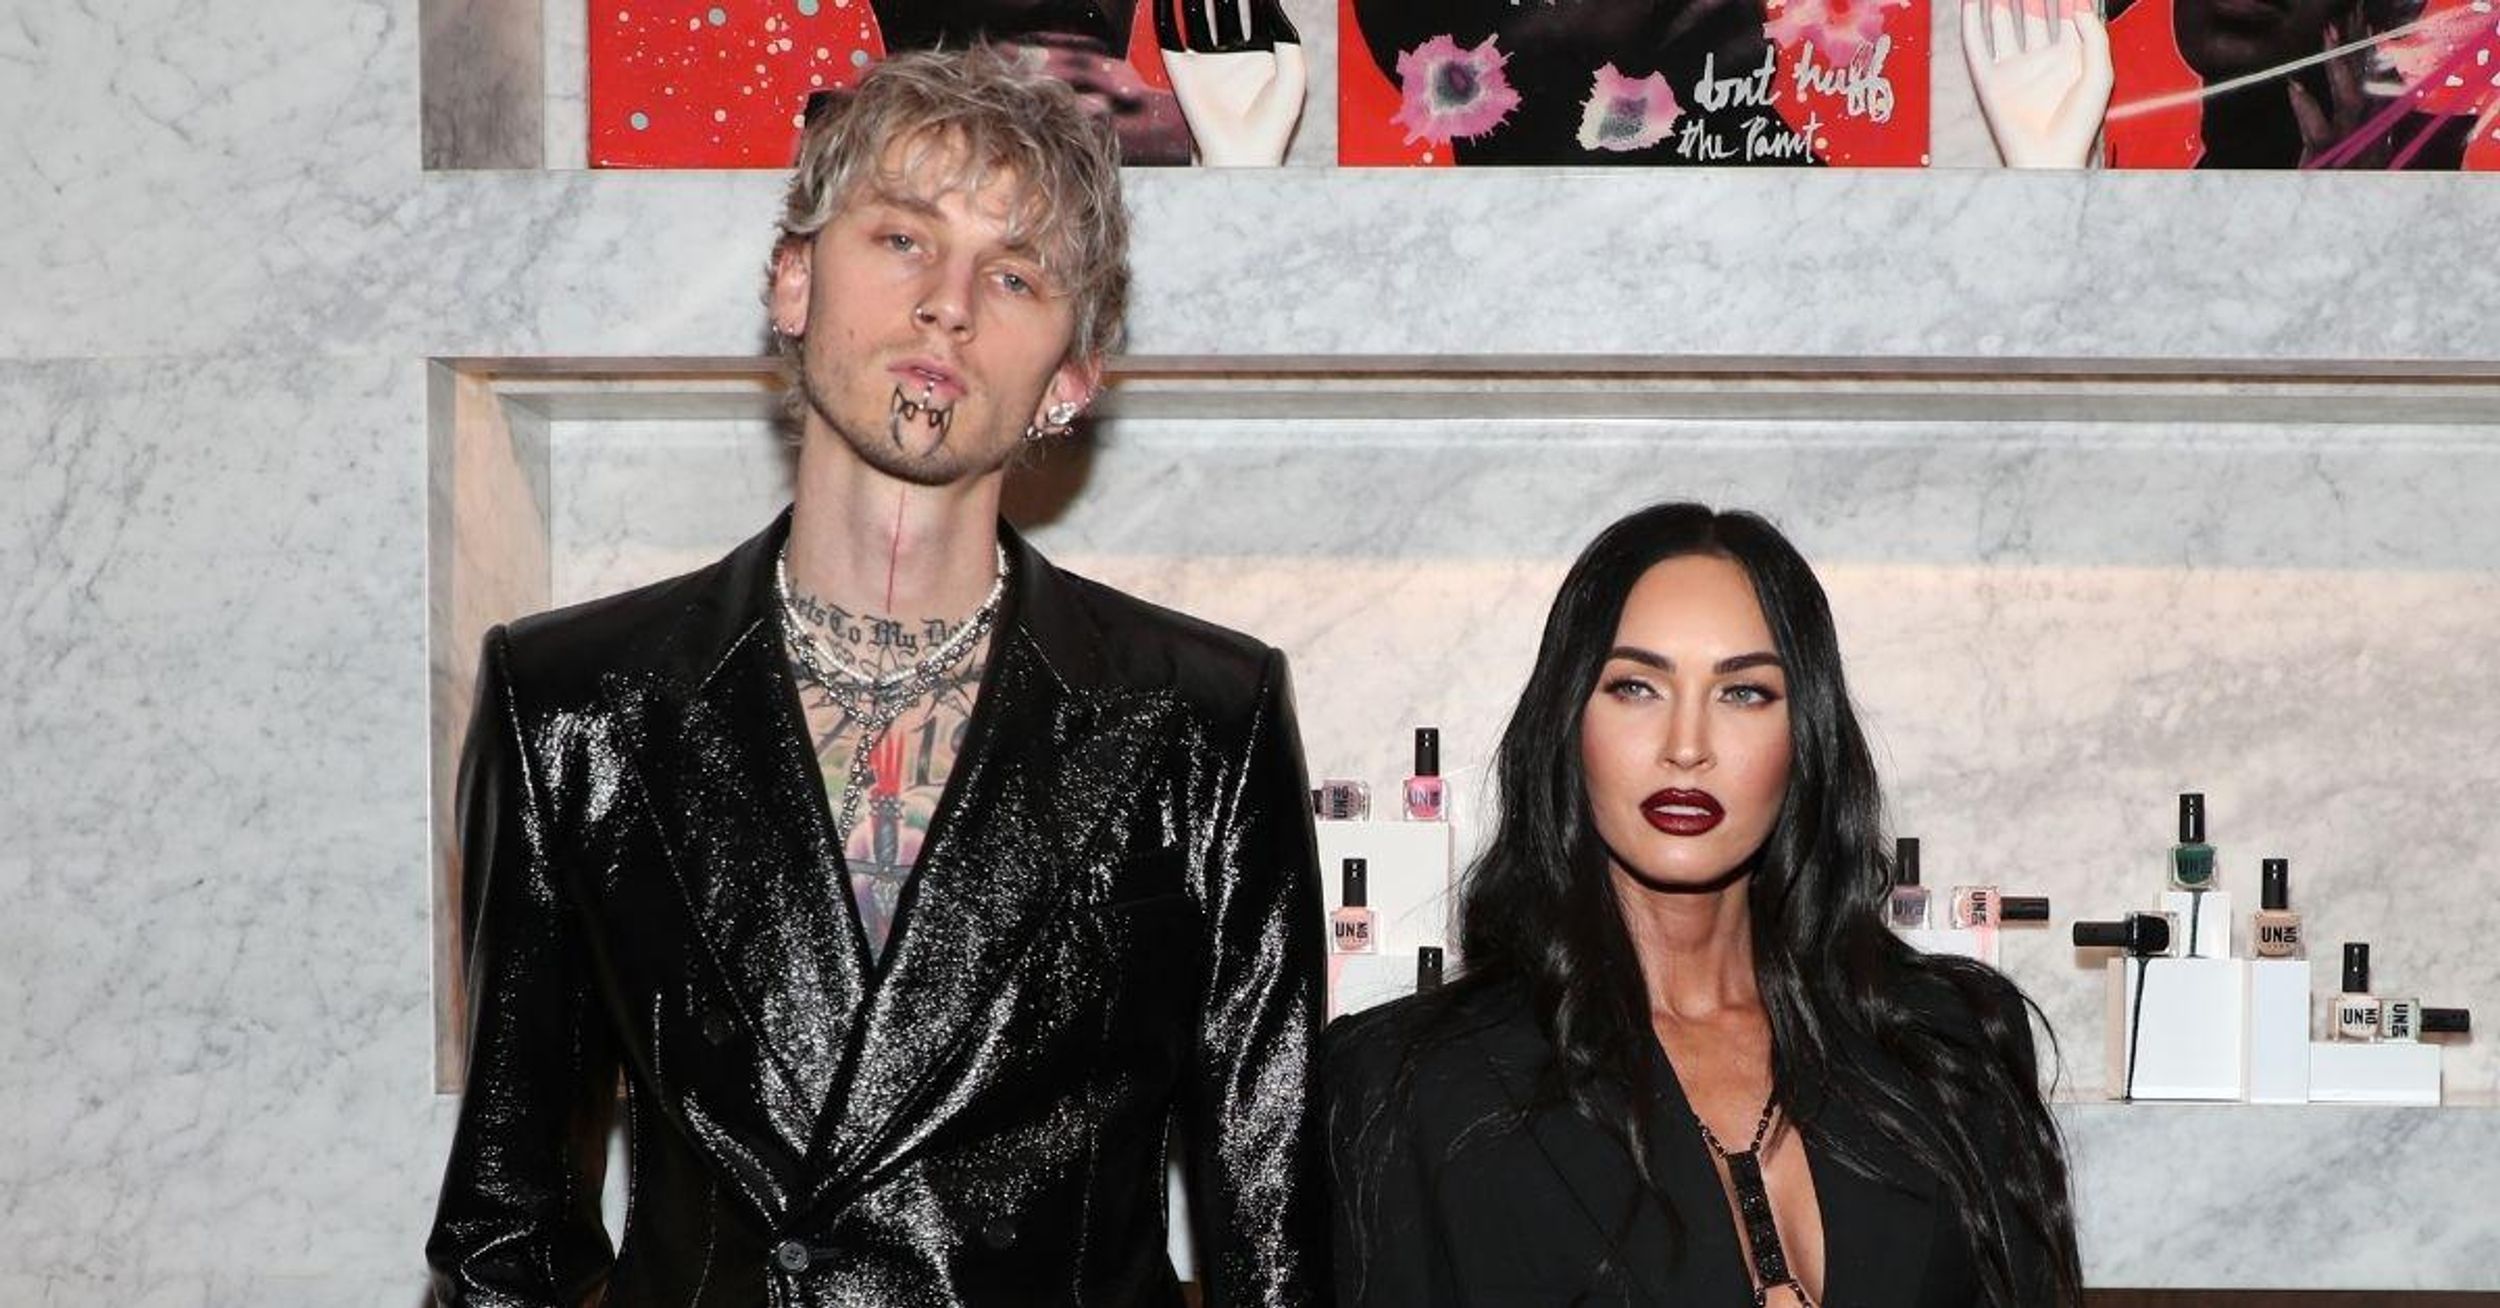 Machine Gun Kelly Ripped For Saying Megan Fox's Ring Is Designed To 'Hurt' If She Tries To Take It Off